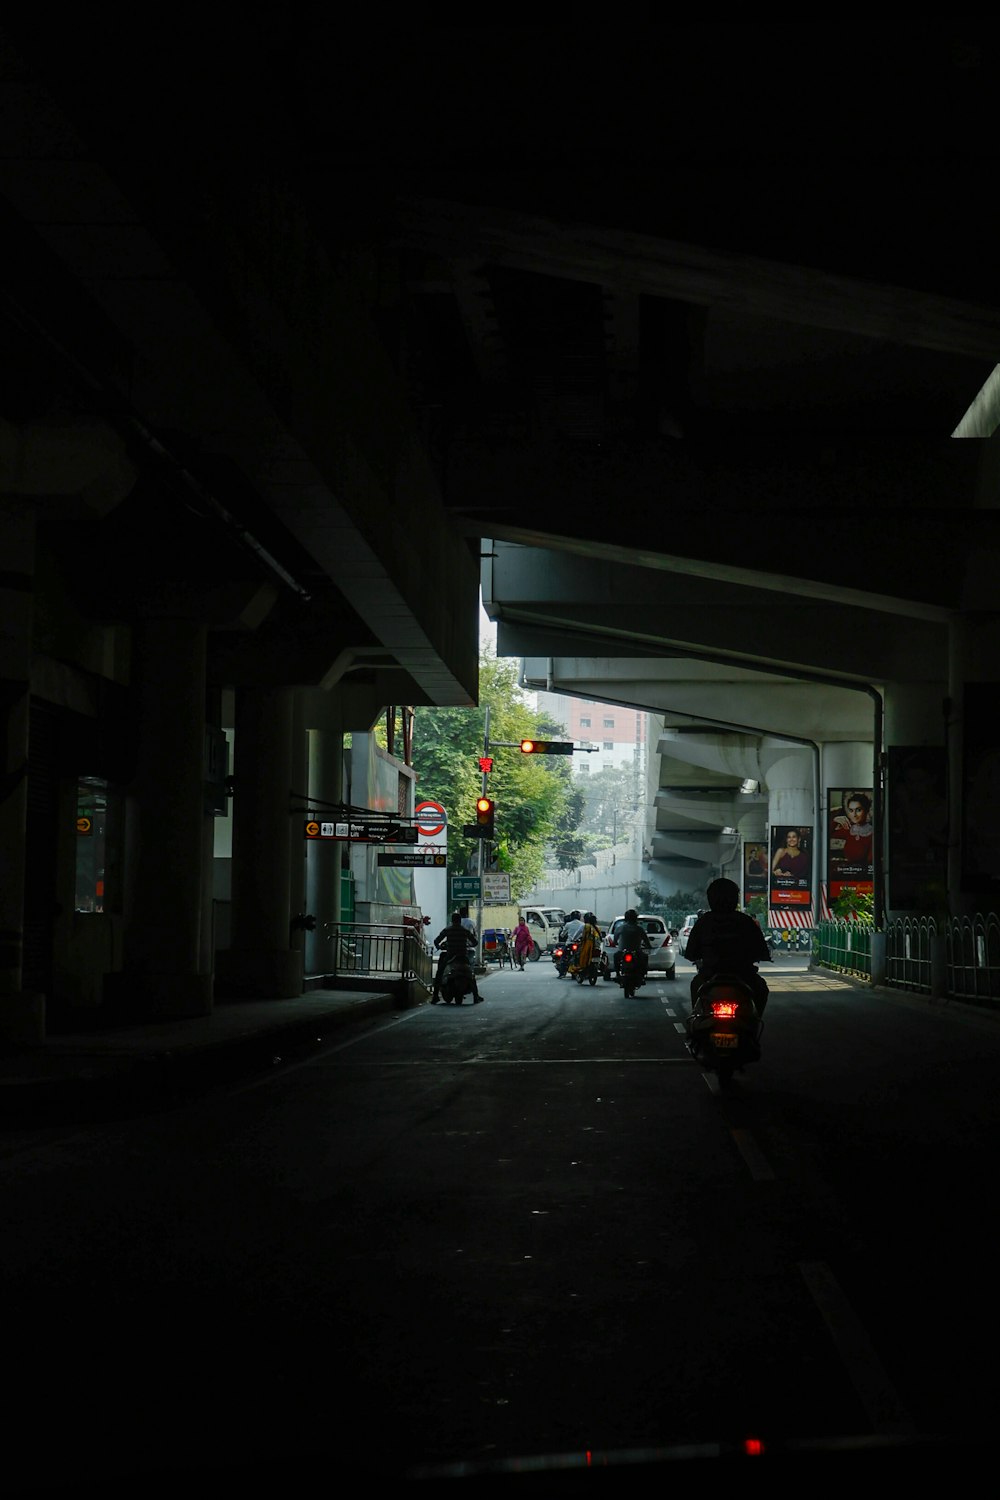 a person riding a motorcycle down a dark street